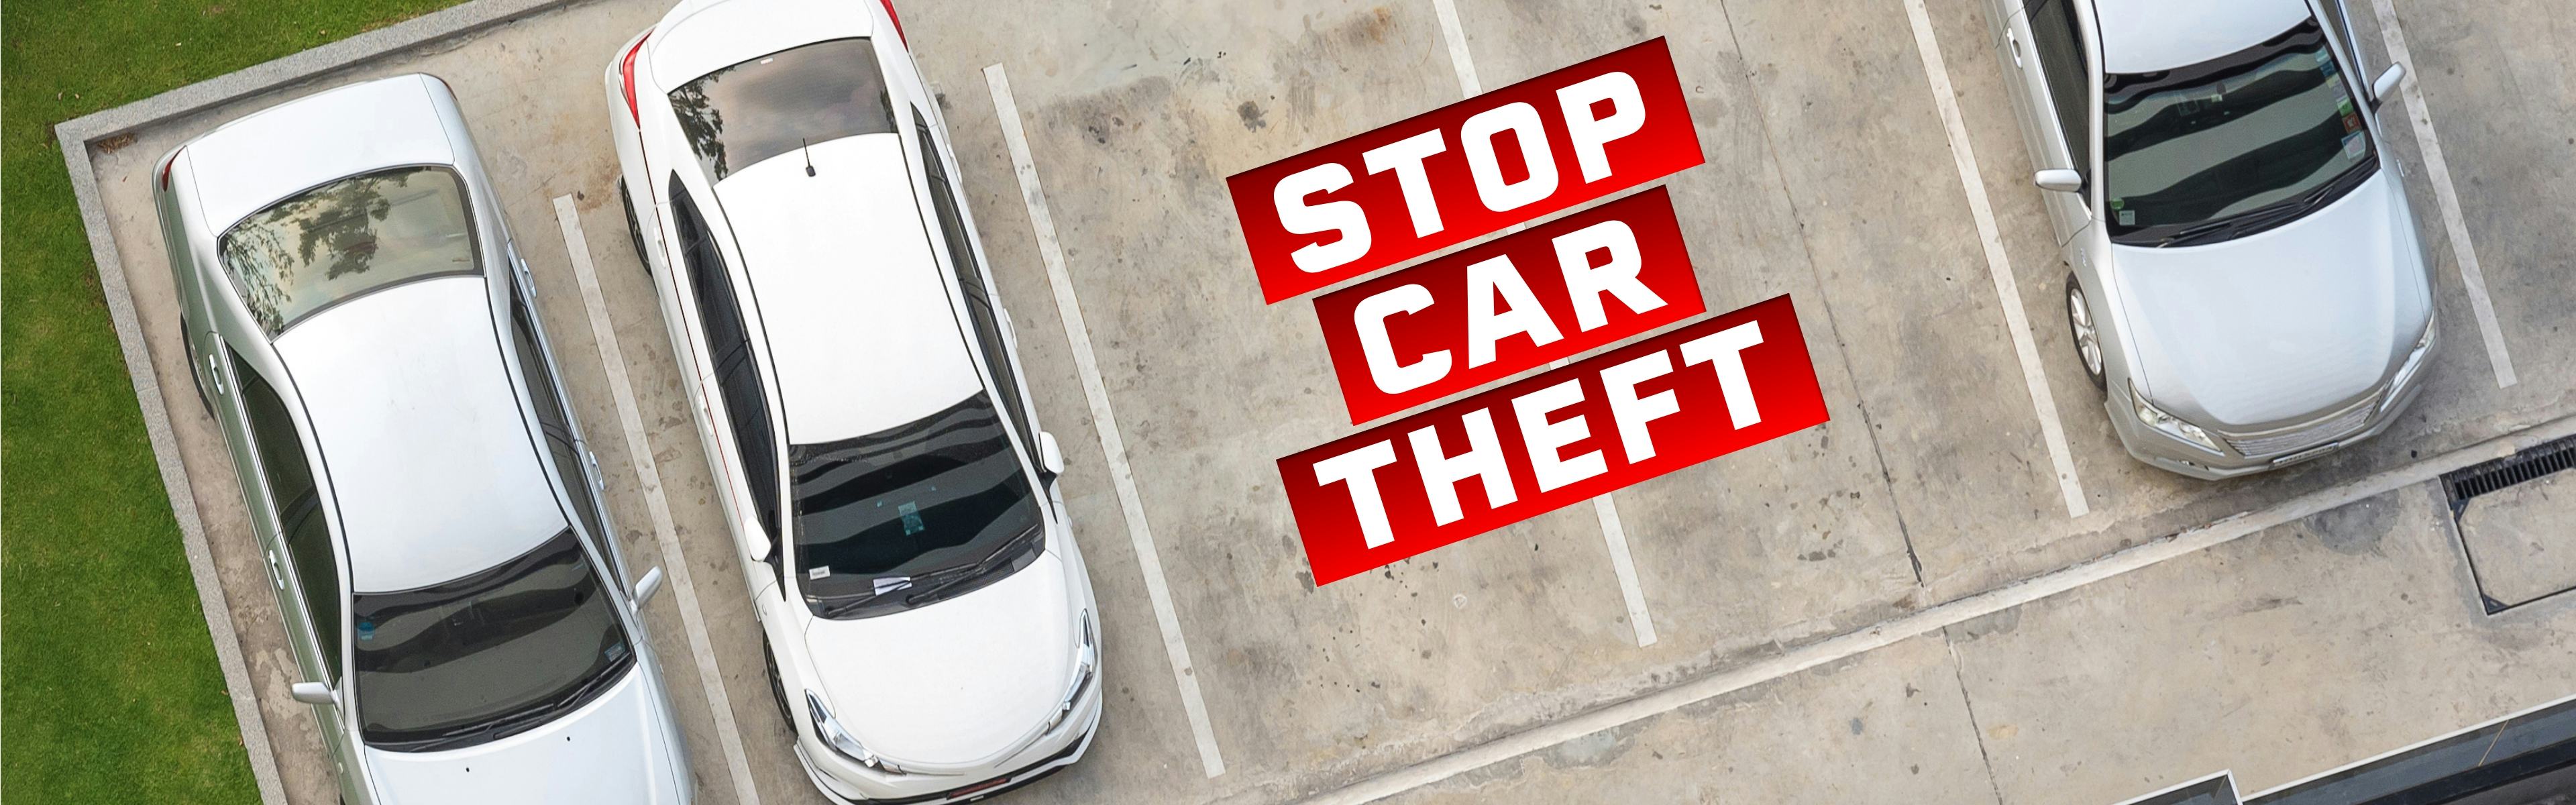 Cars in a parking lot with "Stop car theft" text